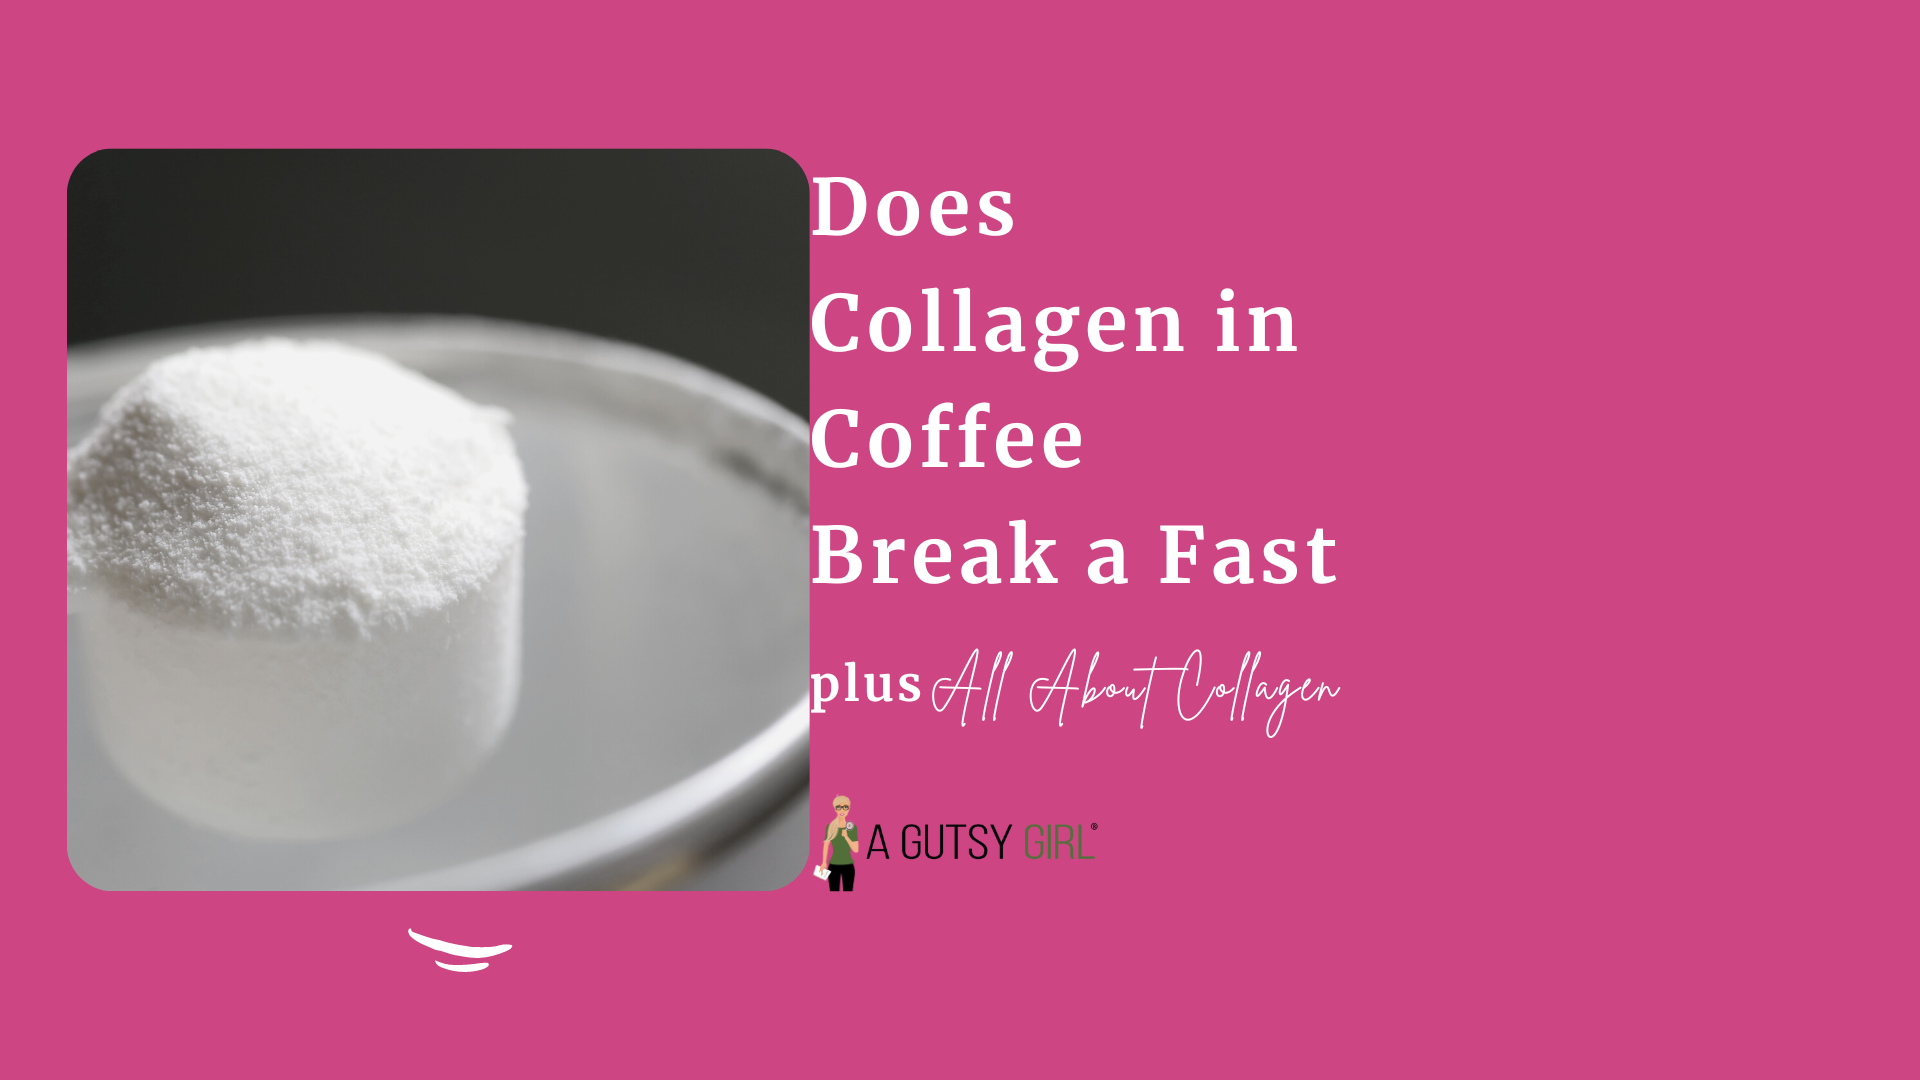 Does Collagen in Coffee Break a Fast? {Your Guide To Collagen}